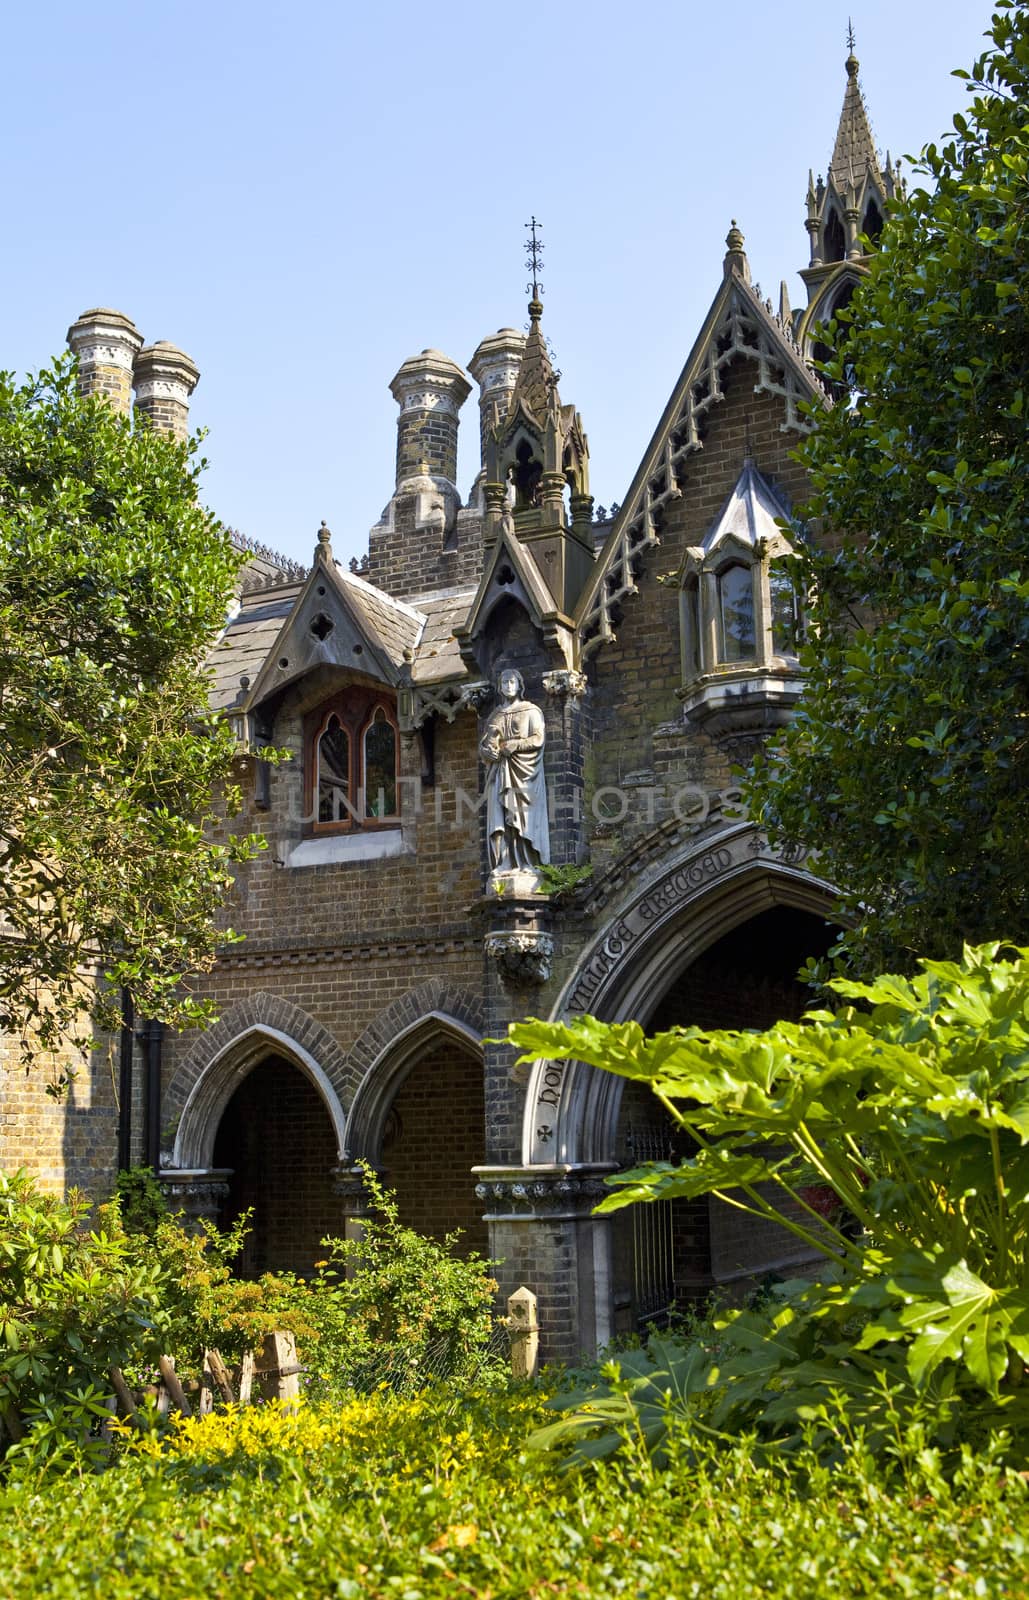 A beautiful gothic-style building in Highgate, London.